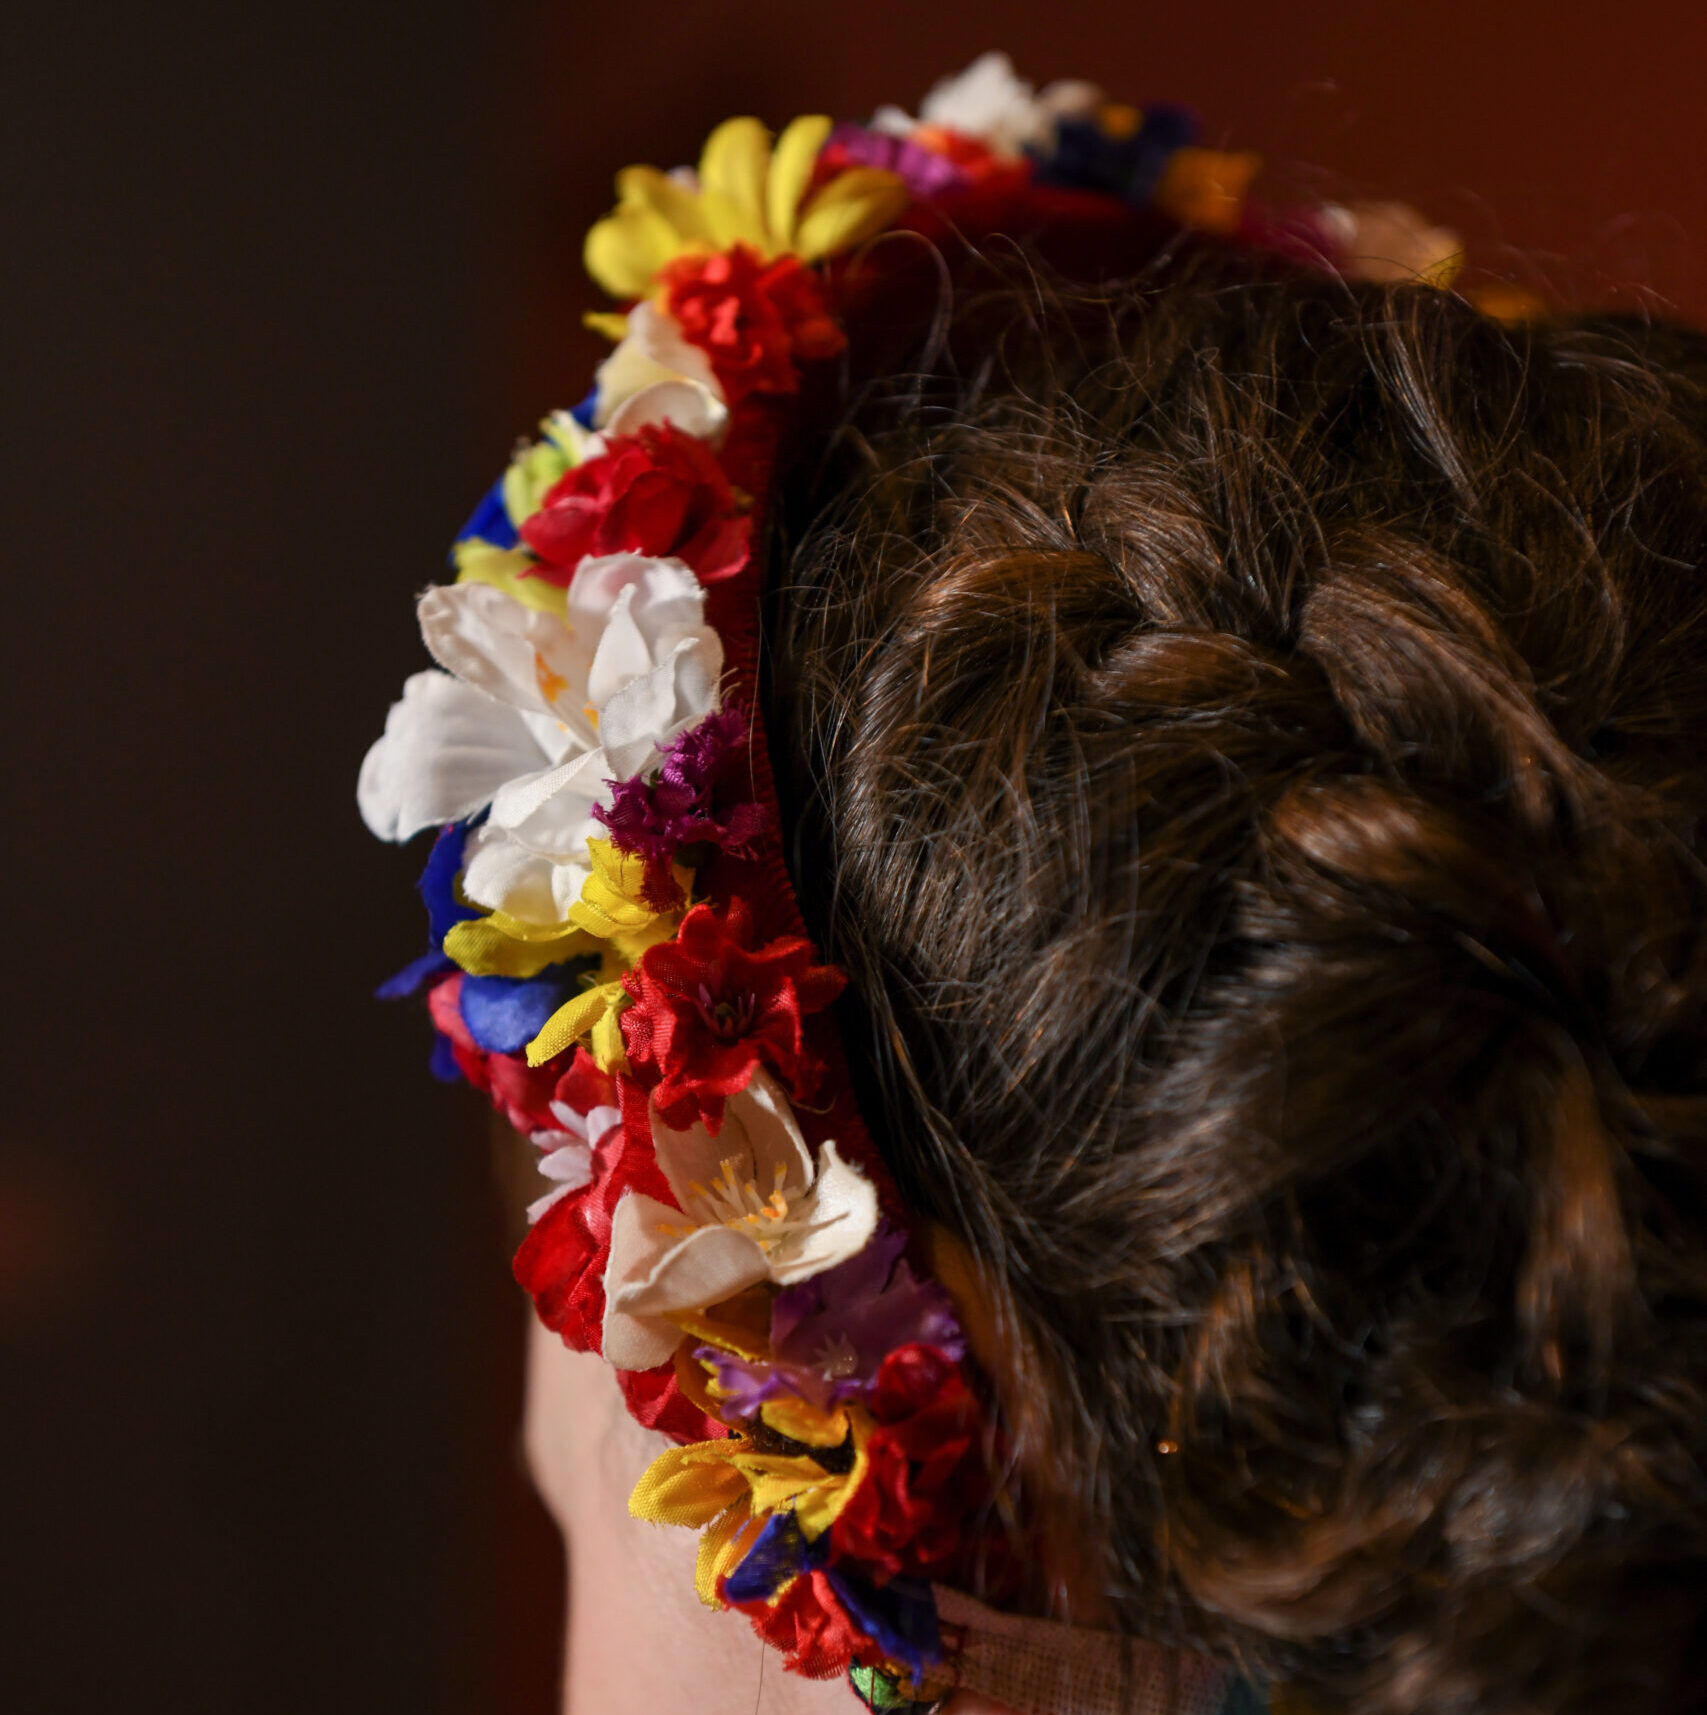 Shot from the back, a dancer wears a headband made of white red and yellow flowers with colorful ribbons hanging from the bottom.